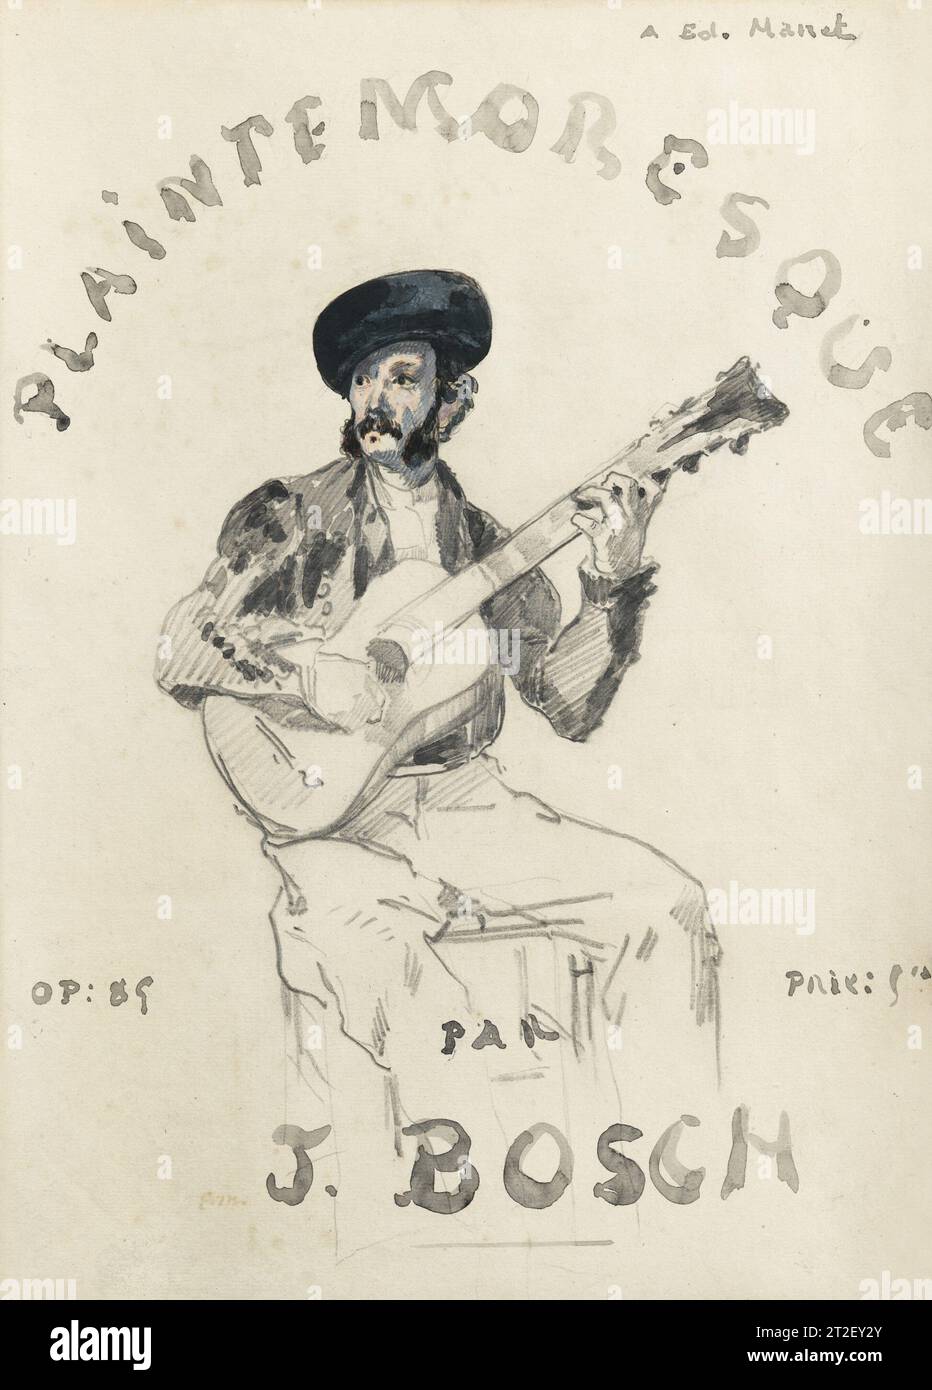 Plainte Moresque: Portrait of Jaime Bosch Edouard Manet French Sitter Jaime Bosch Spanish ca. 1866 In this design for a cover to sheet music, Manet portrays his friend, the Catalan composer and guitarist, Jaime Bosch. The musician dedicated this piece for solo guitar, his 'Moorish Lament,' to Manet, as indicated by the inscription at upper right. Bosch regularly performed at the musical gatherings hosted by the painter and his wife, the pianist Suzanne Leenhoff. The drawing and resulting print are a testament not only to their relationship, but also to Manet's abiding interest in Spanish cultu Stock Photo